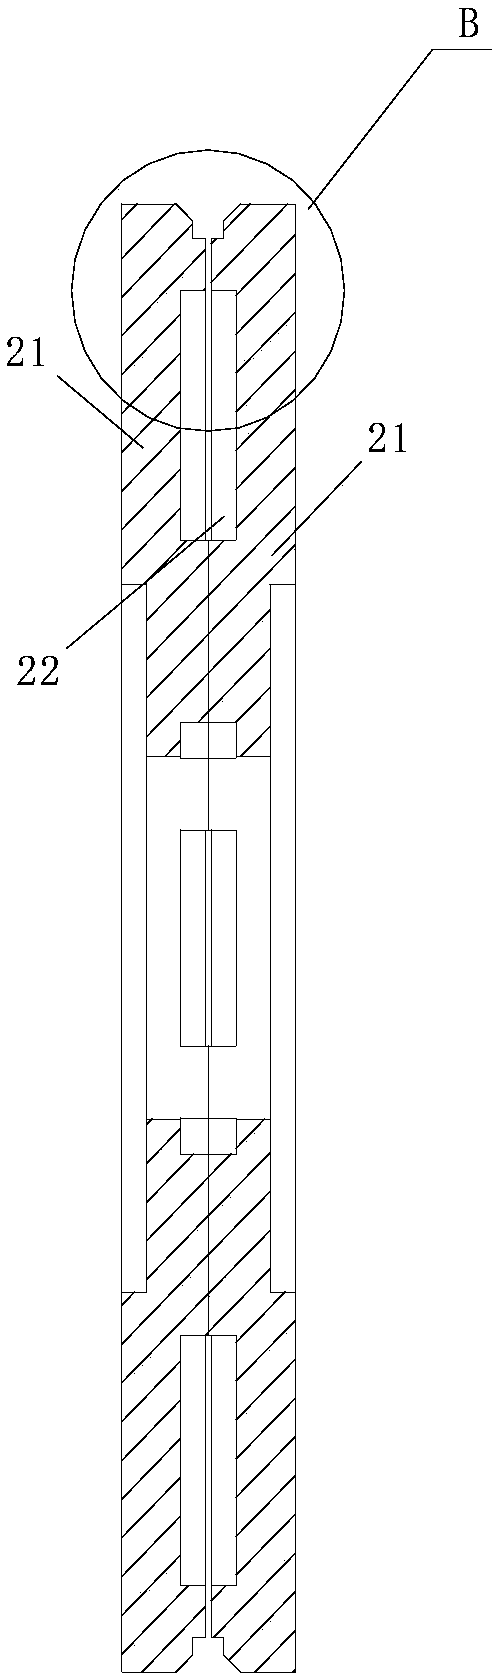 Suction seed metering apparatus for wheat